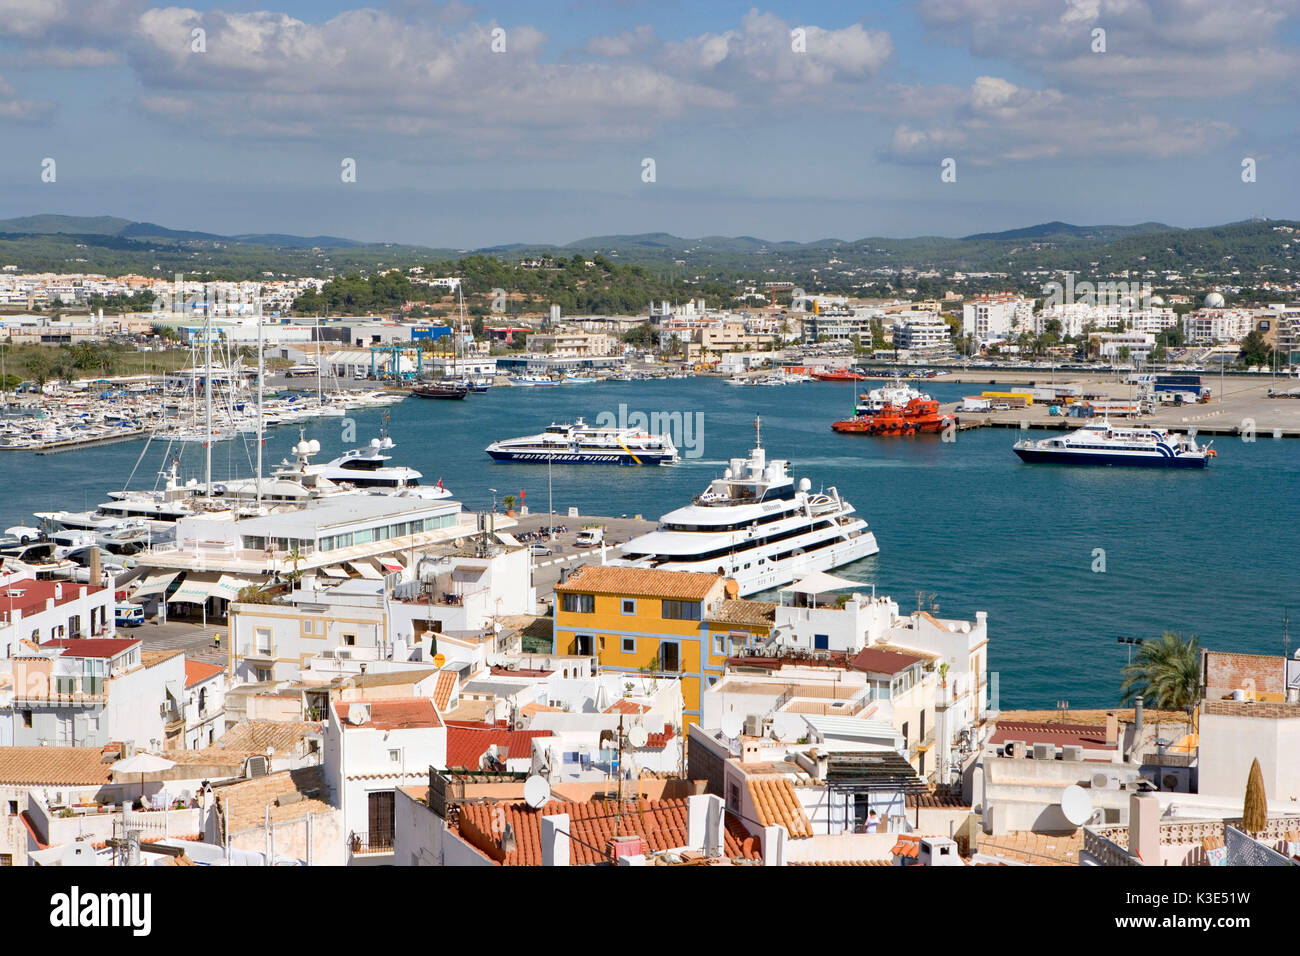 Eivissa, capital of Ibiza, view over the roofs of the Old Town, the harbour and the backcountry Stock Photo